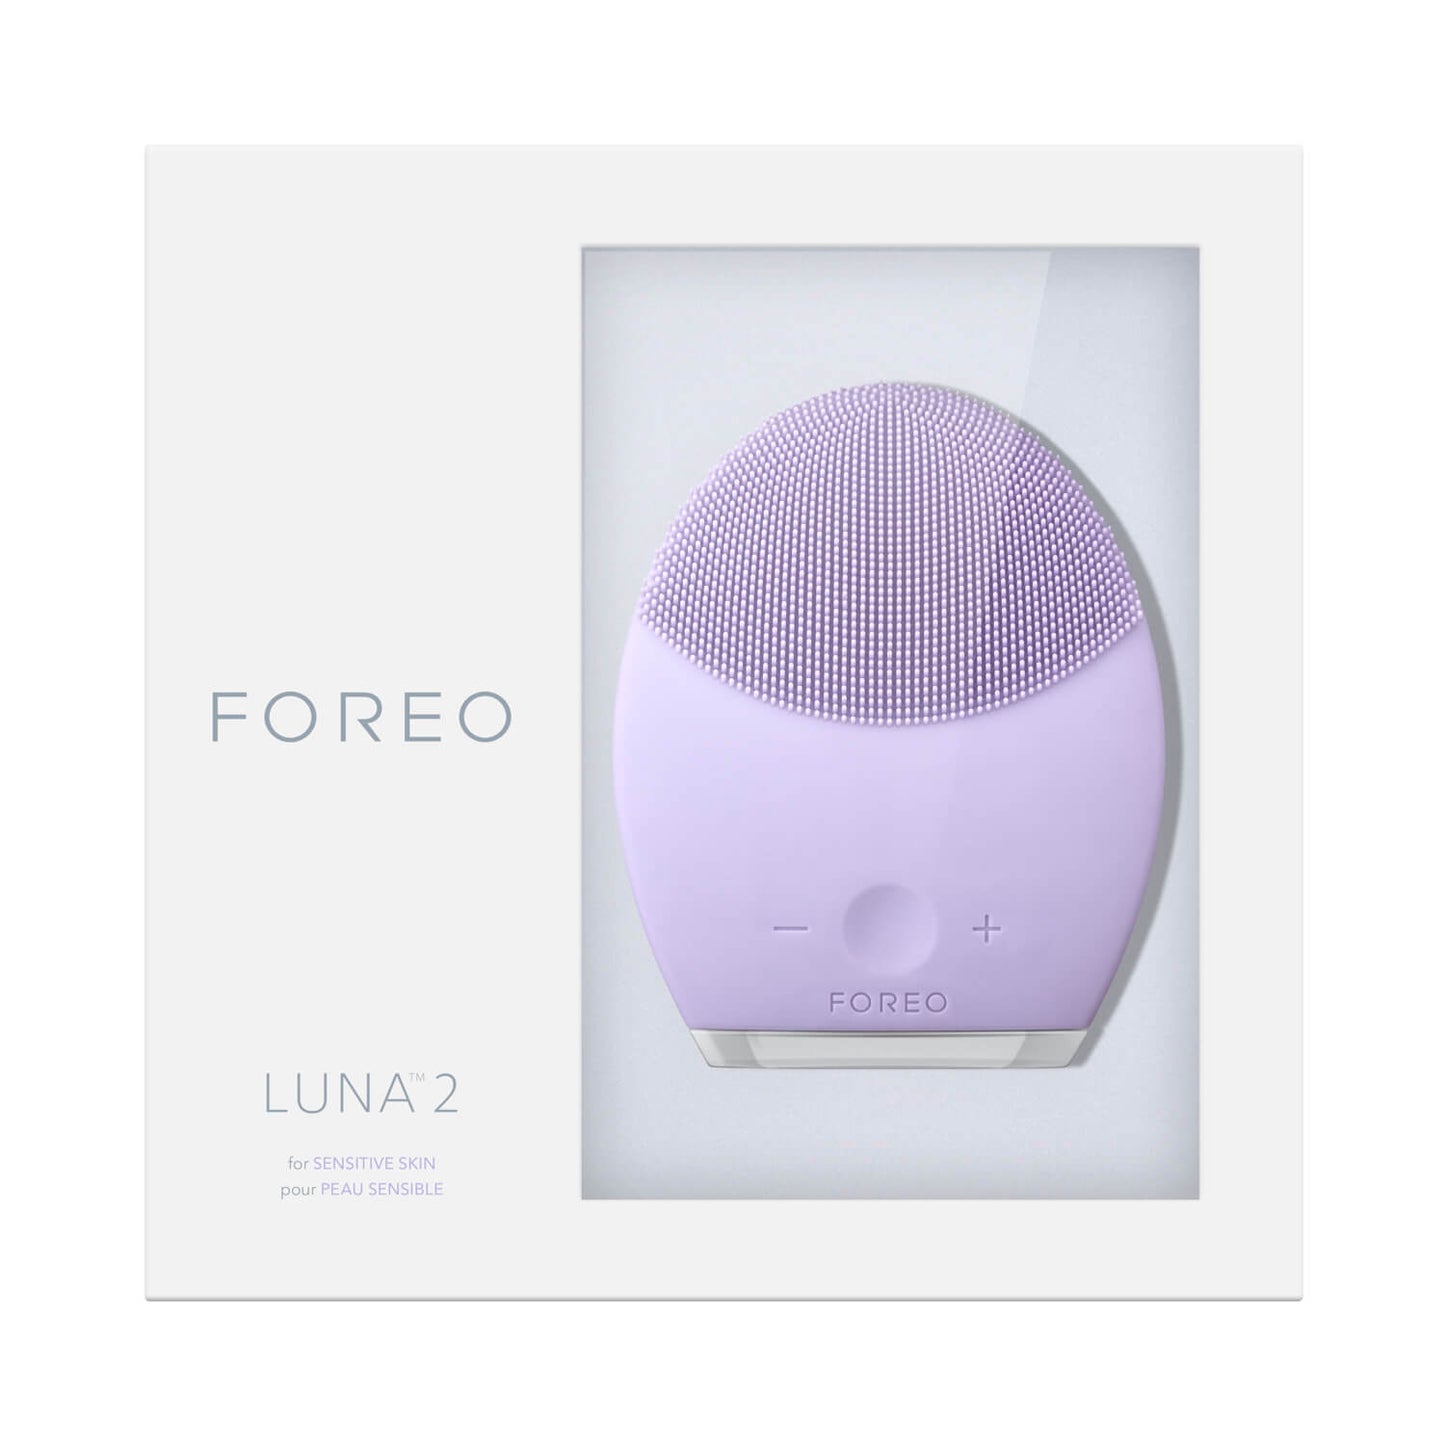 FOREO LUNA 2 Facial Cleansing Brush for Sensitive Skin Packaging Front